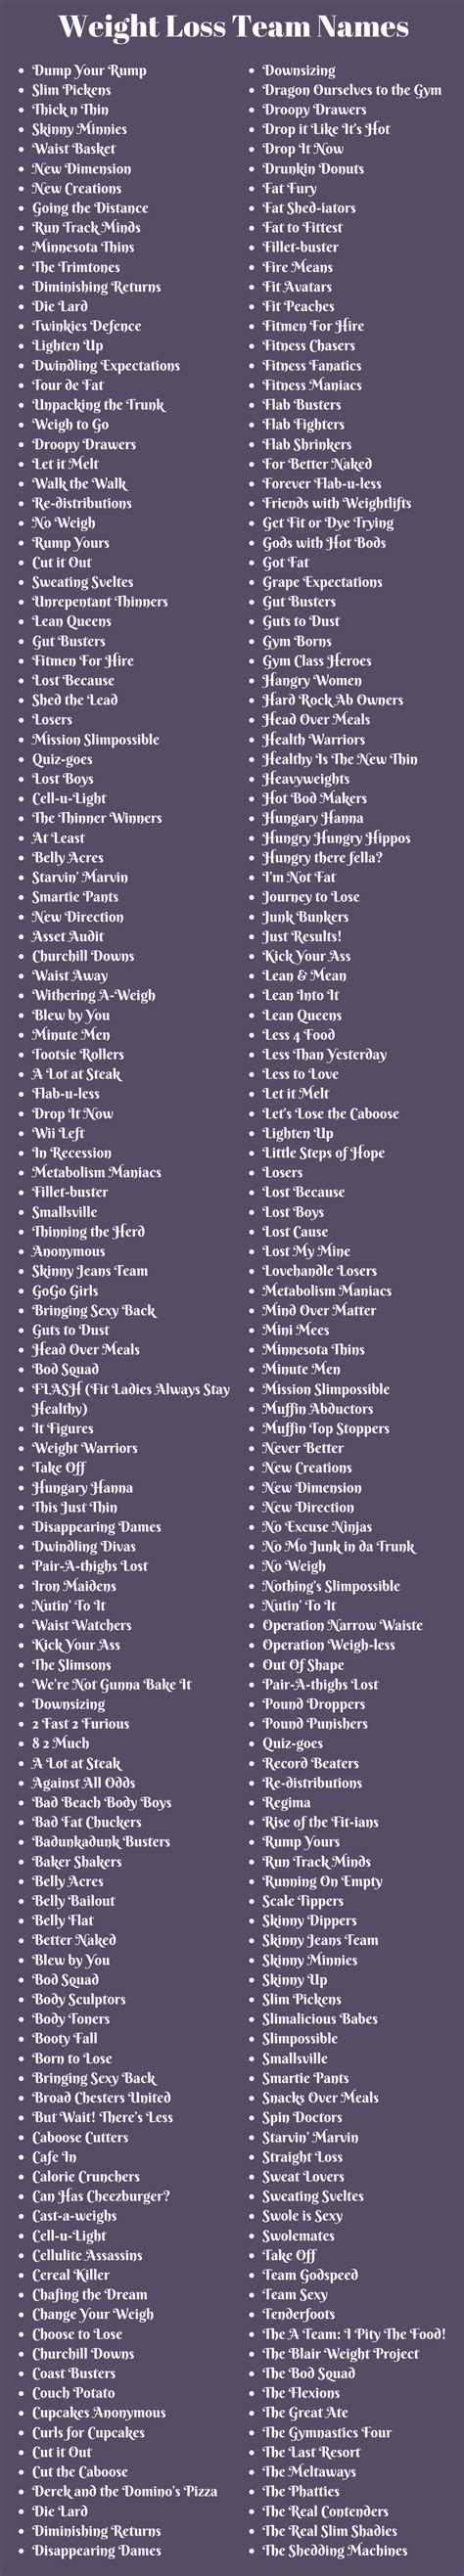 Weight Loss Team Names 200 Catchy Weight Loss Challenge Names